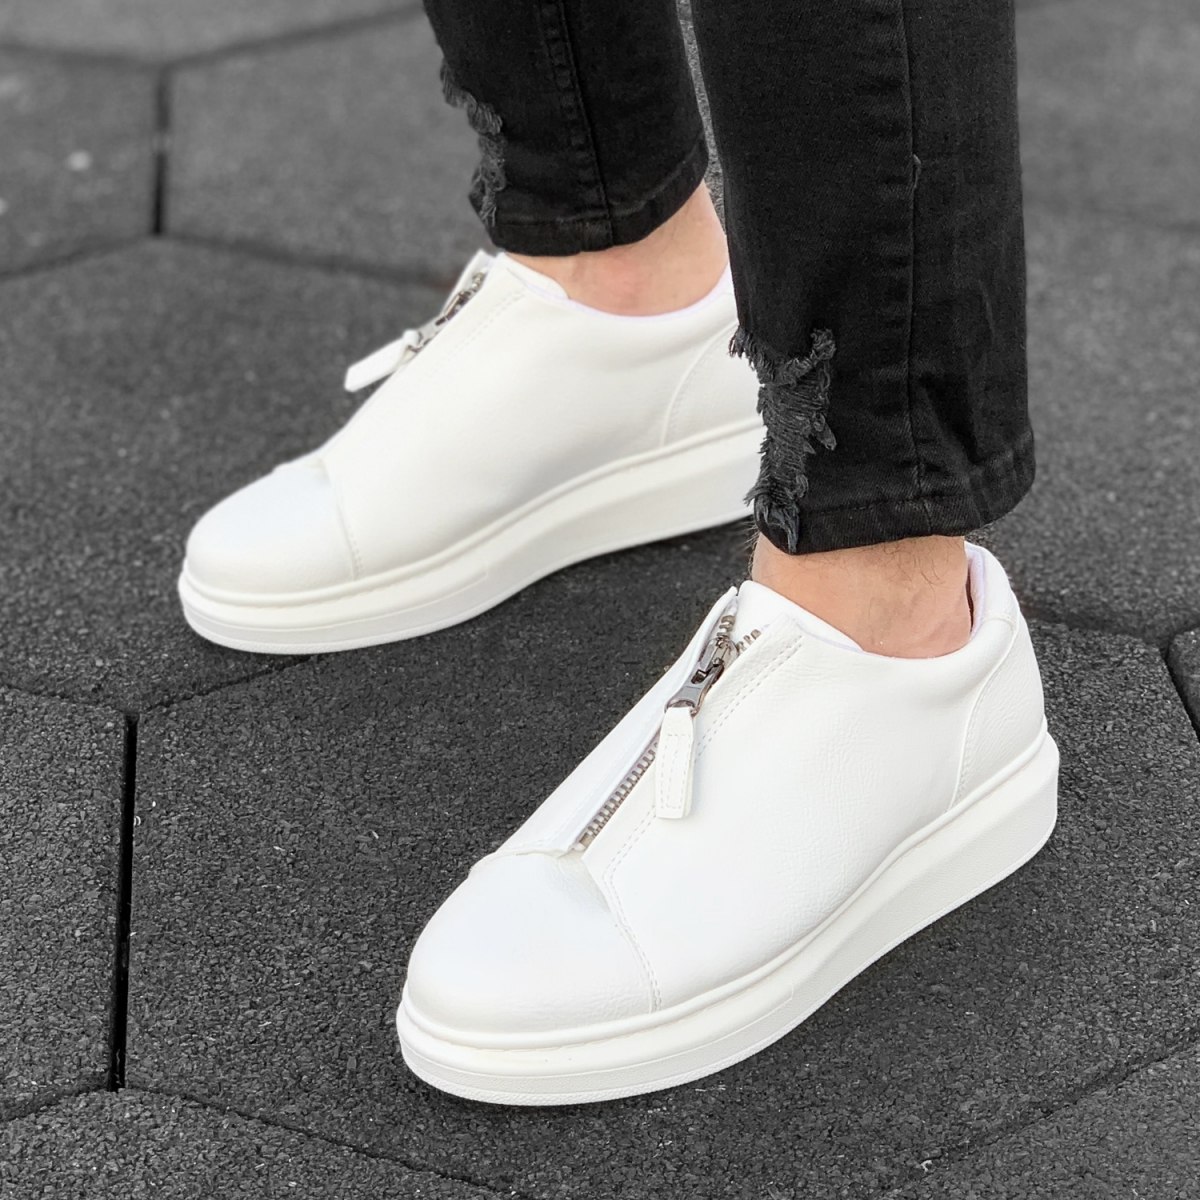 Zip-Up Sneakers in White Color White Size 40